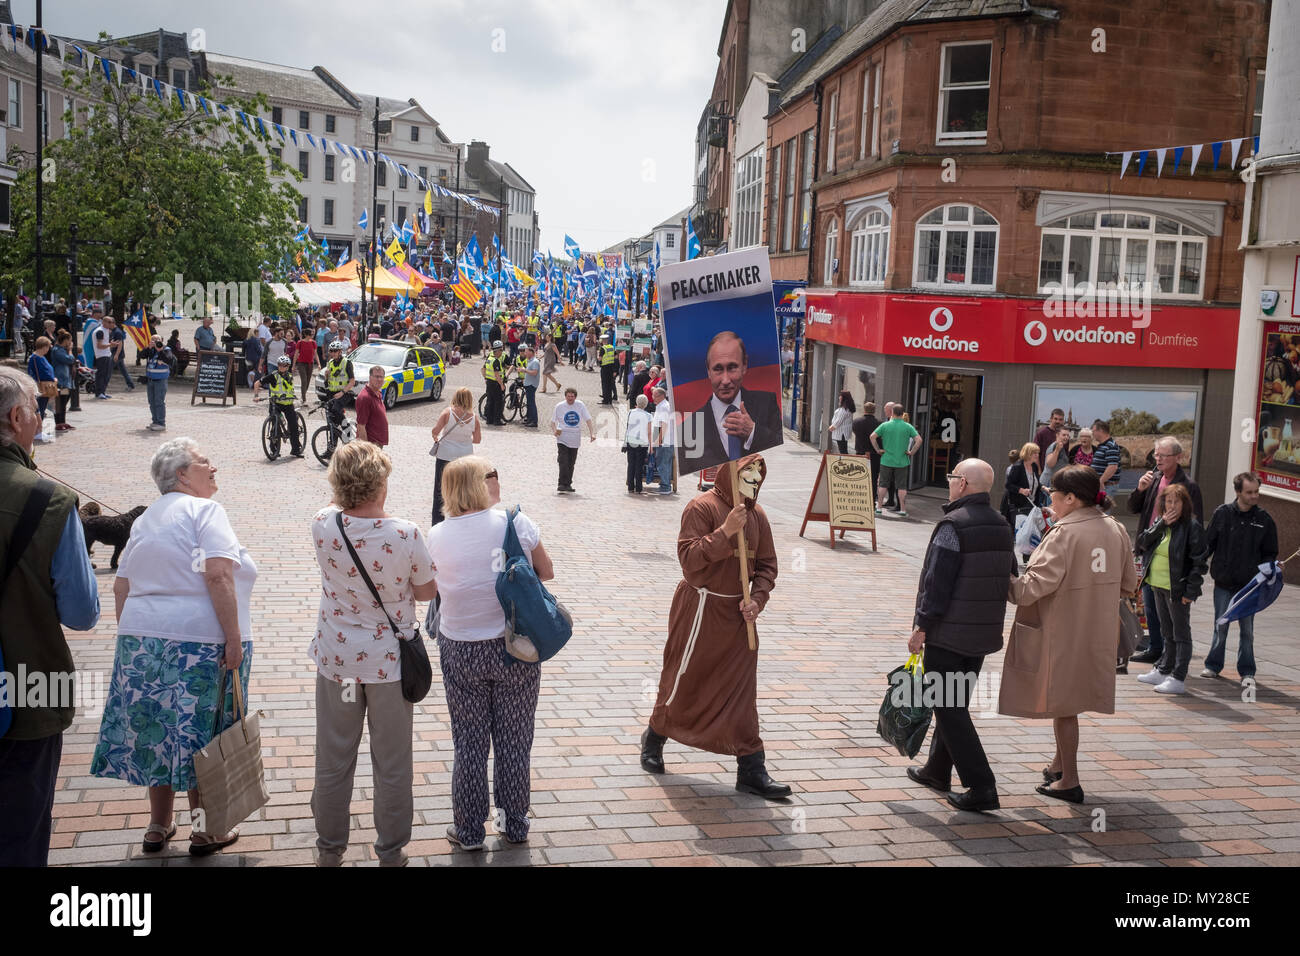 Dumfries town centre, Scotland, June 2nd 2018, a protester with a placard showing Vladimir Putin, wanders through the crowd before a march. Stock Photo